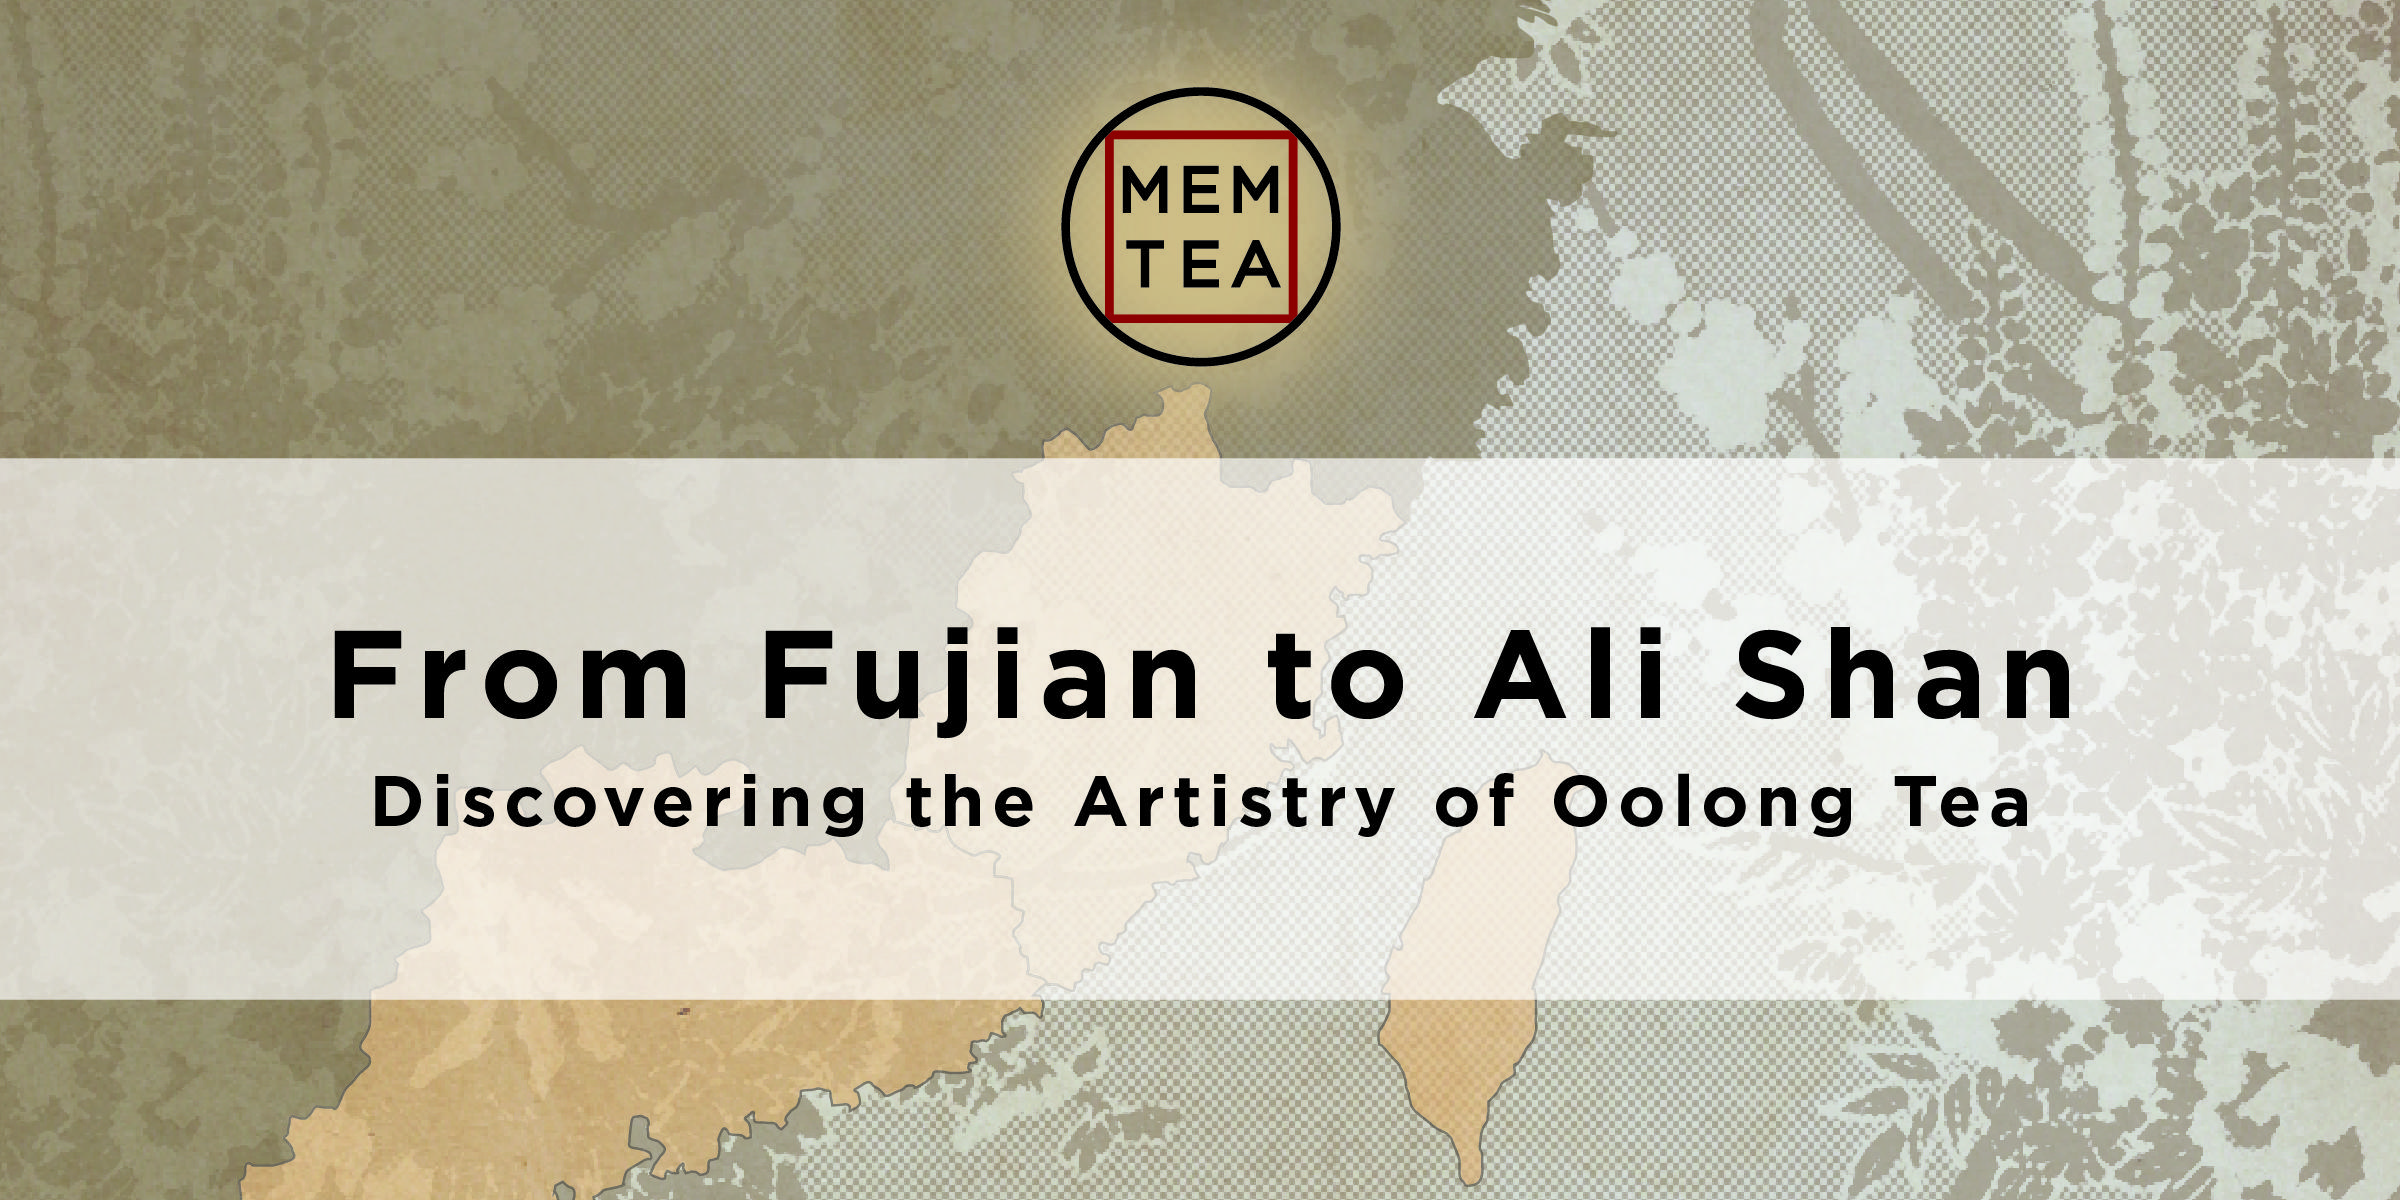 From Fujian To Ali Shan: Discovering the Artistry of Oolong Tea